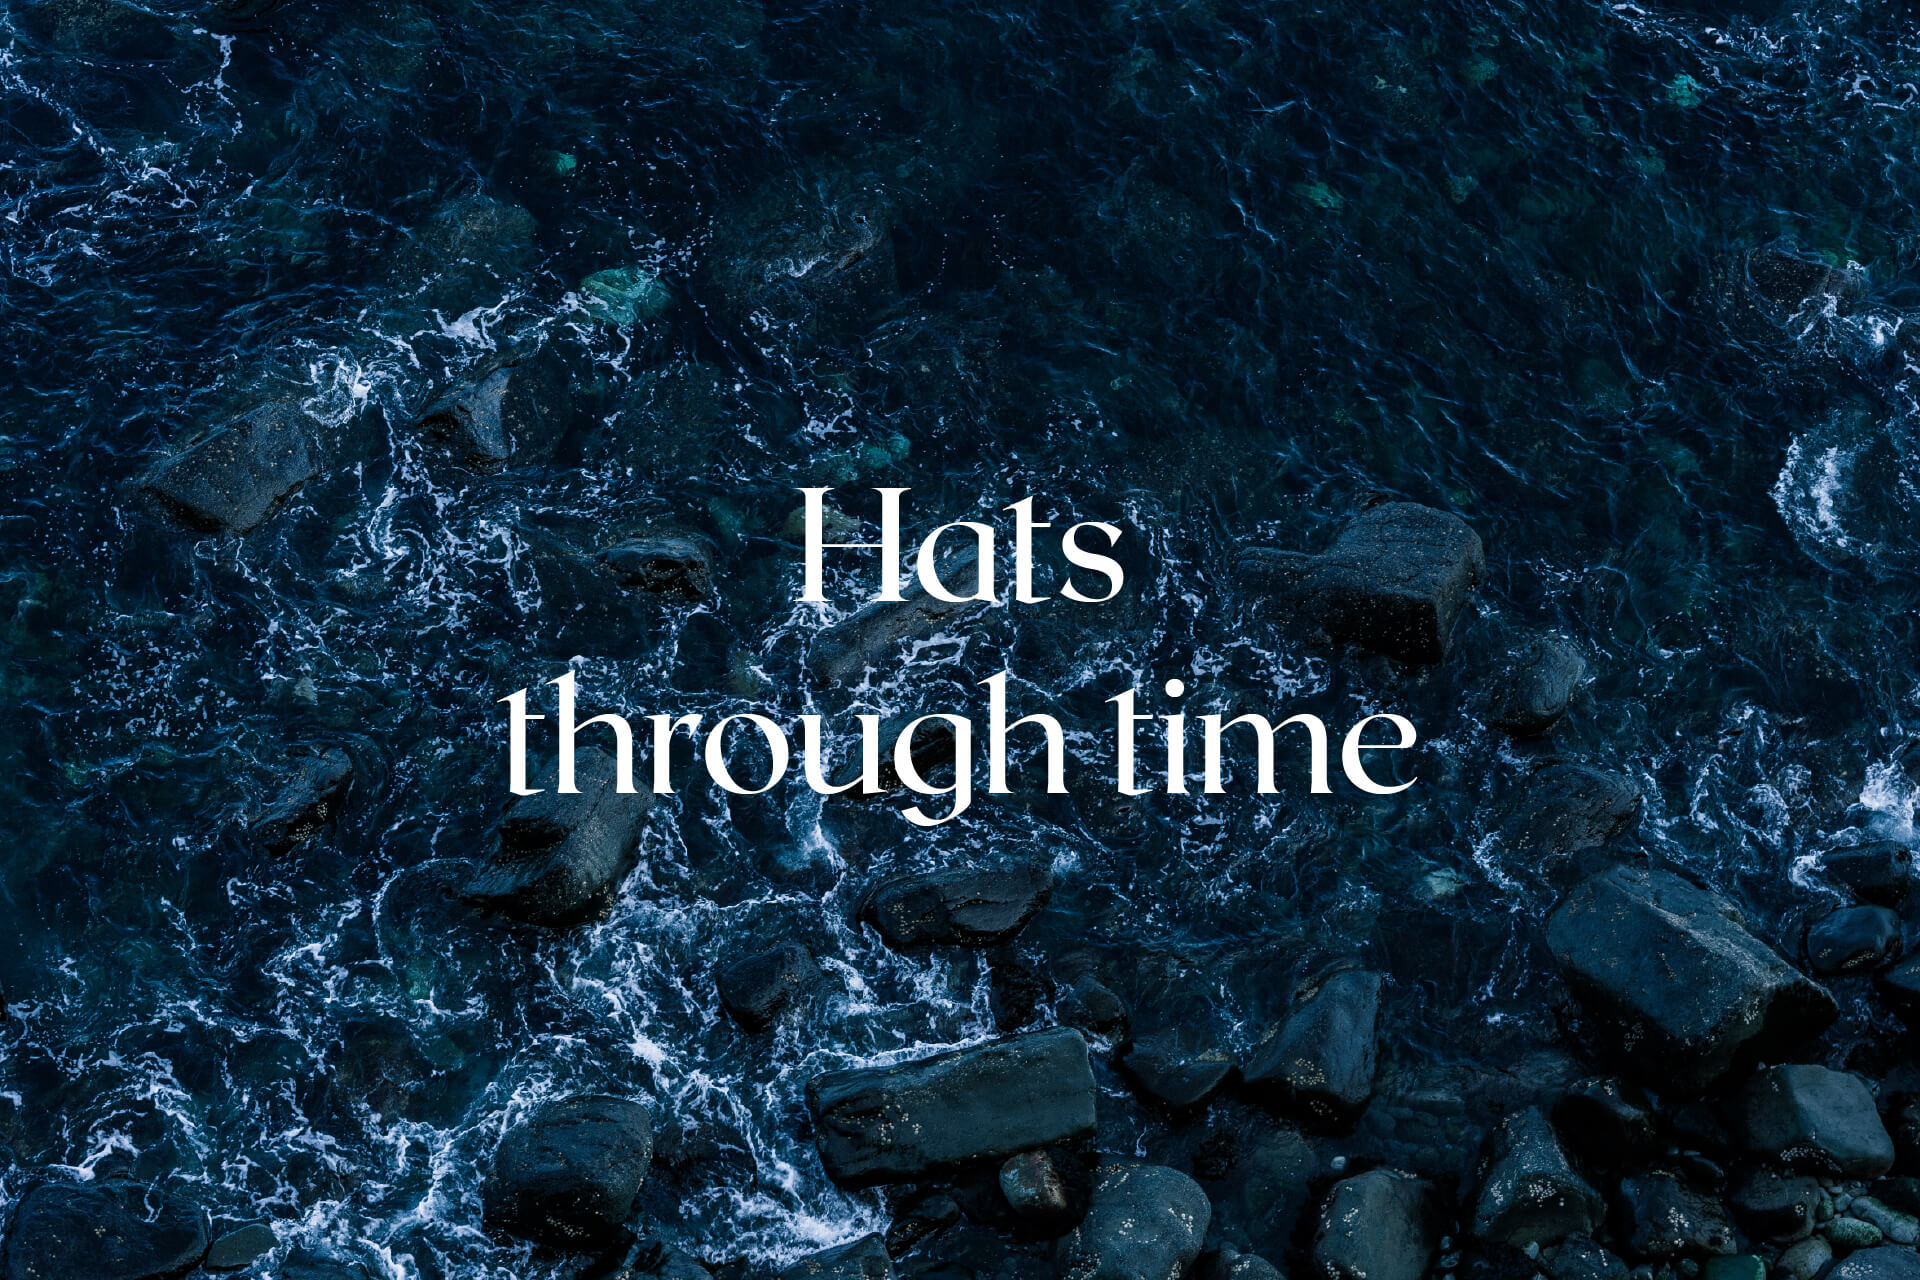 Hats through time